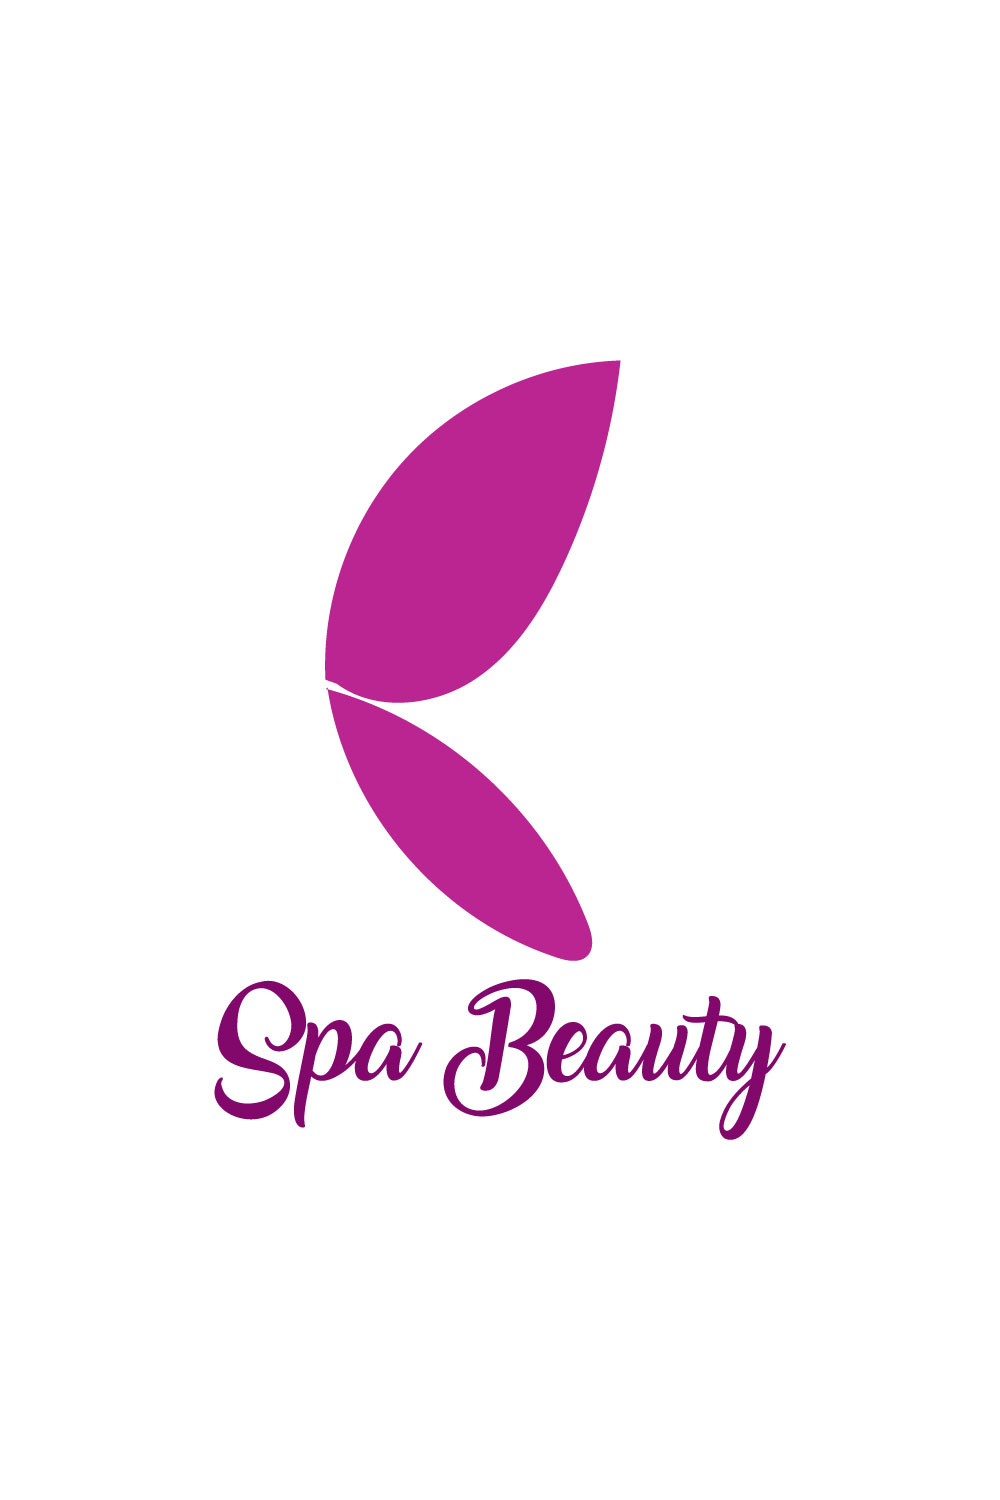 Free Spa Care logo pinterest preview image.